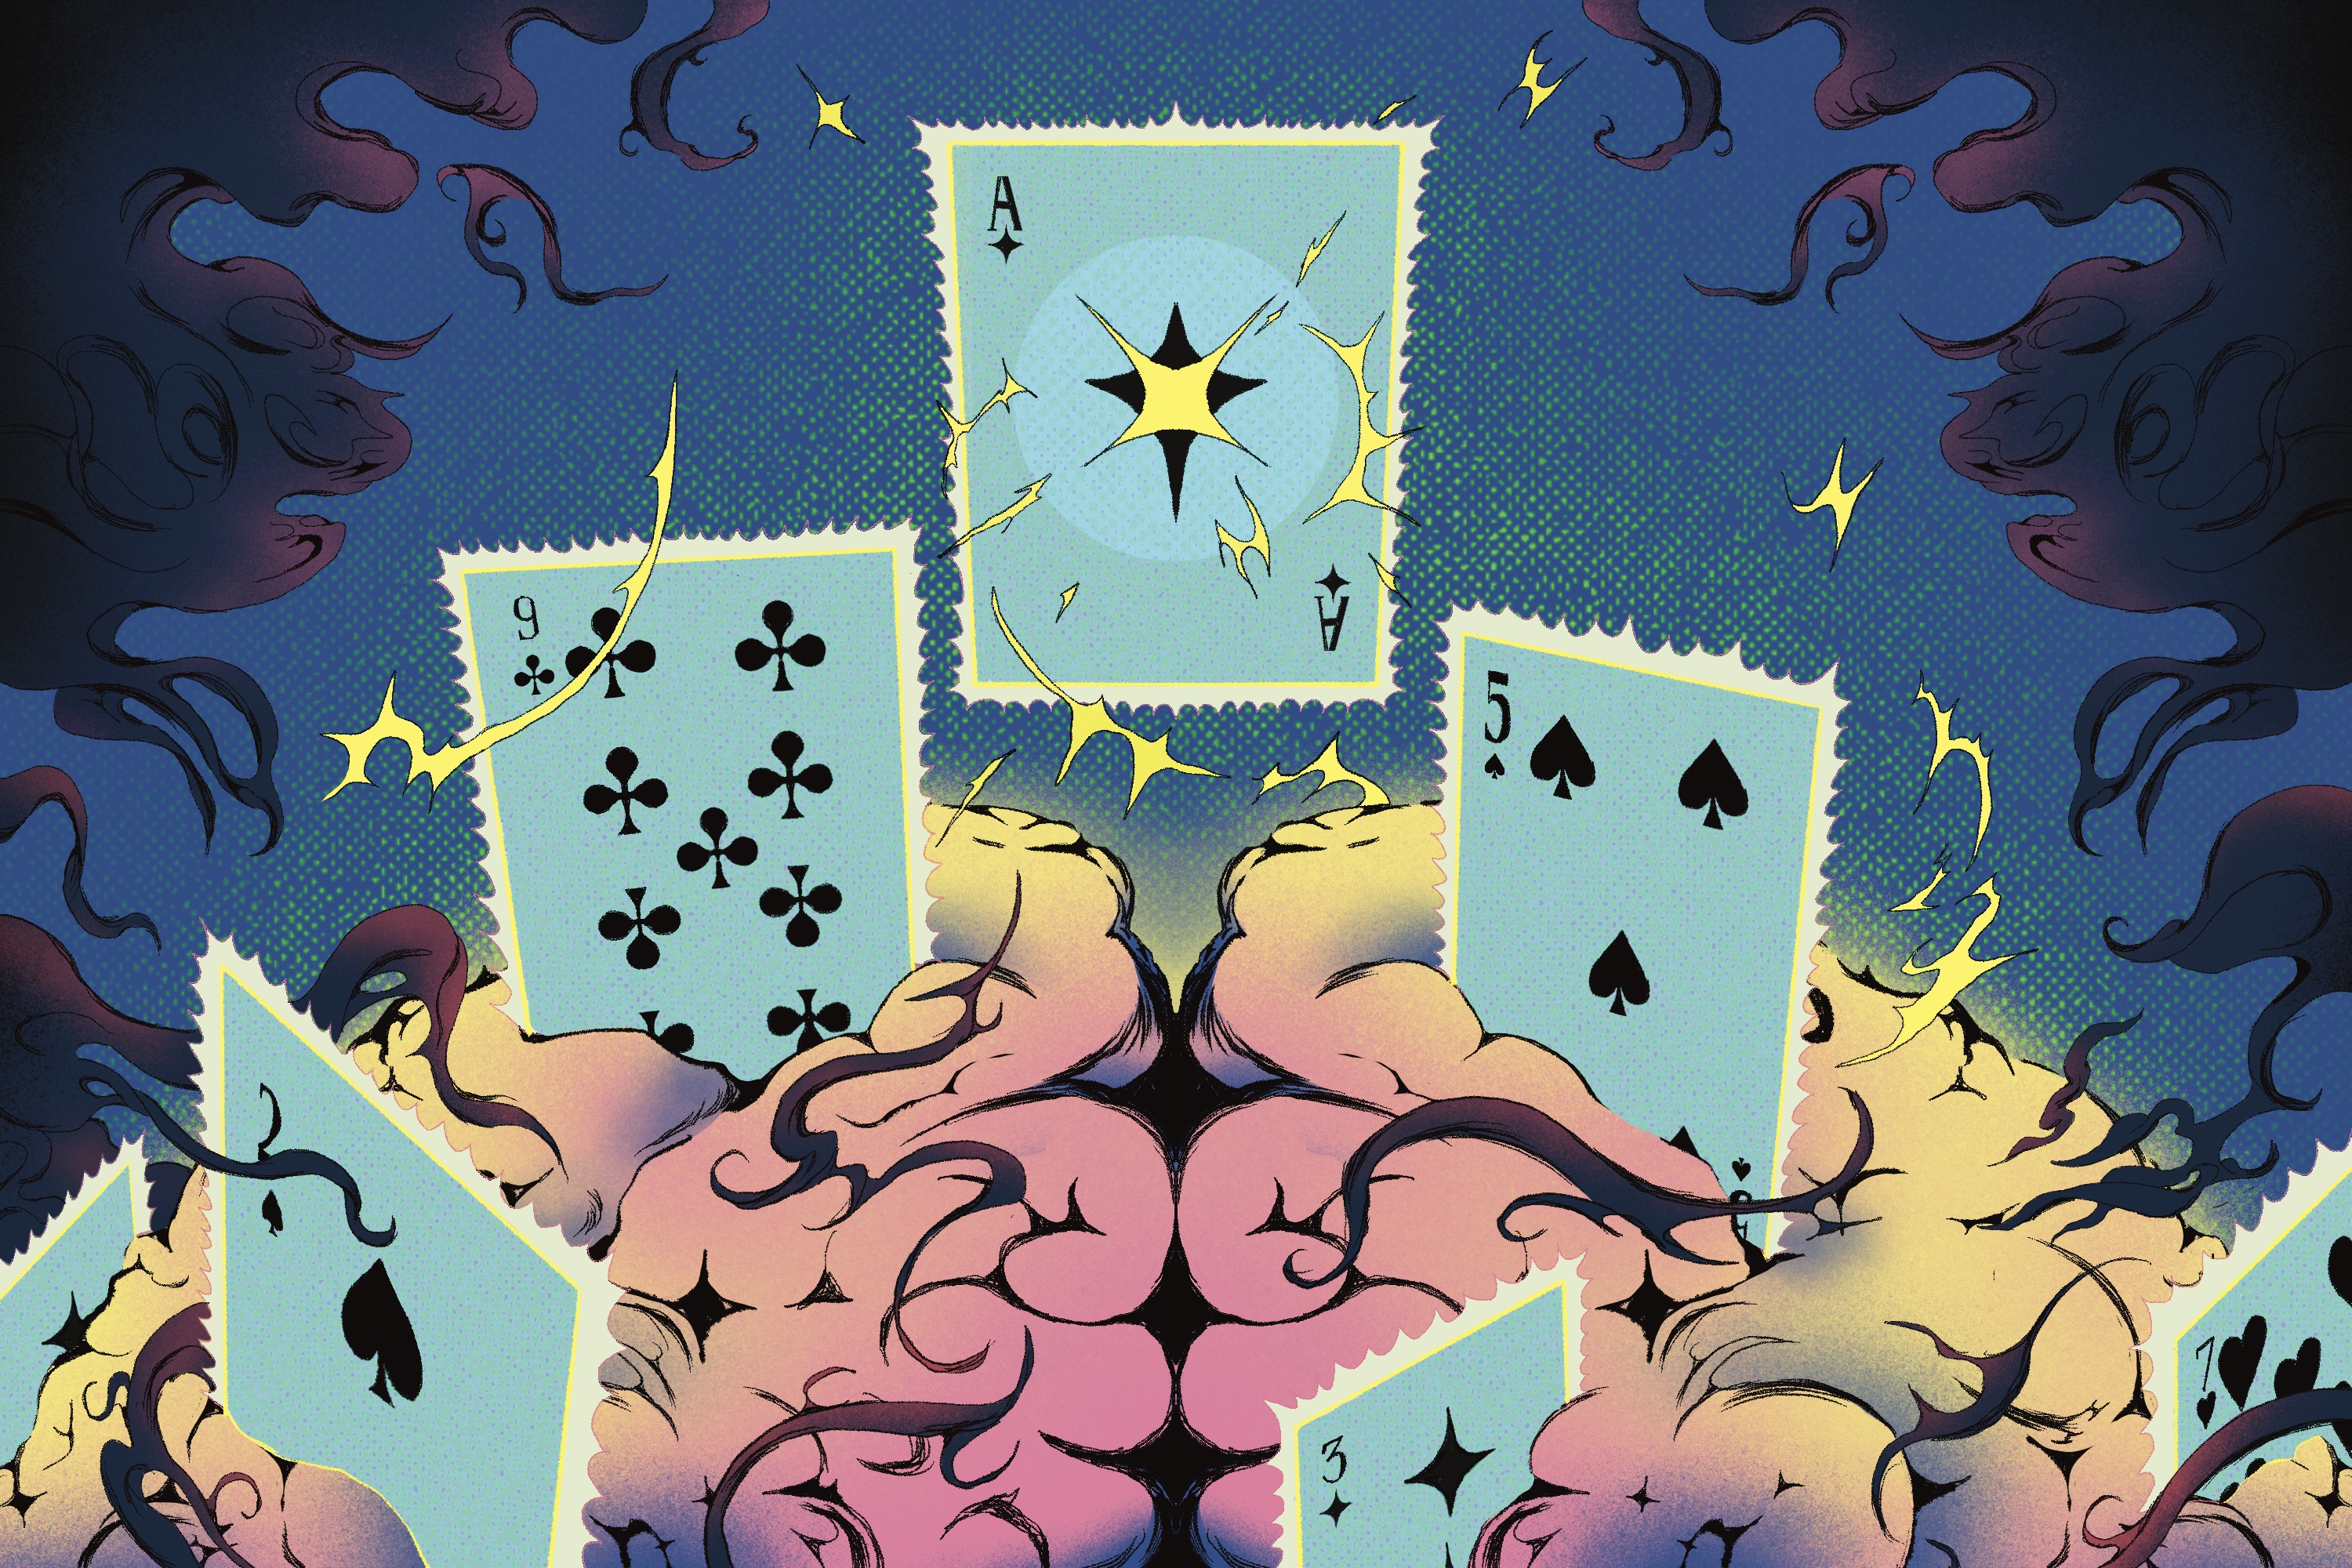 An illustration shows cards floating around a brain, representing the ways games can be addictive